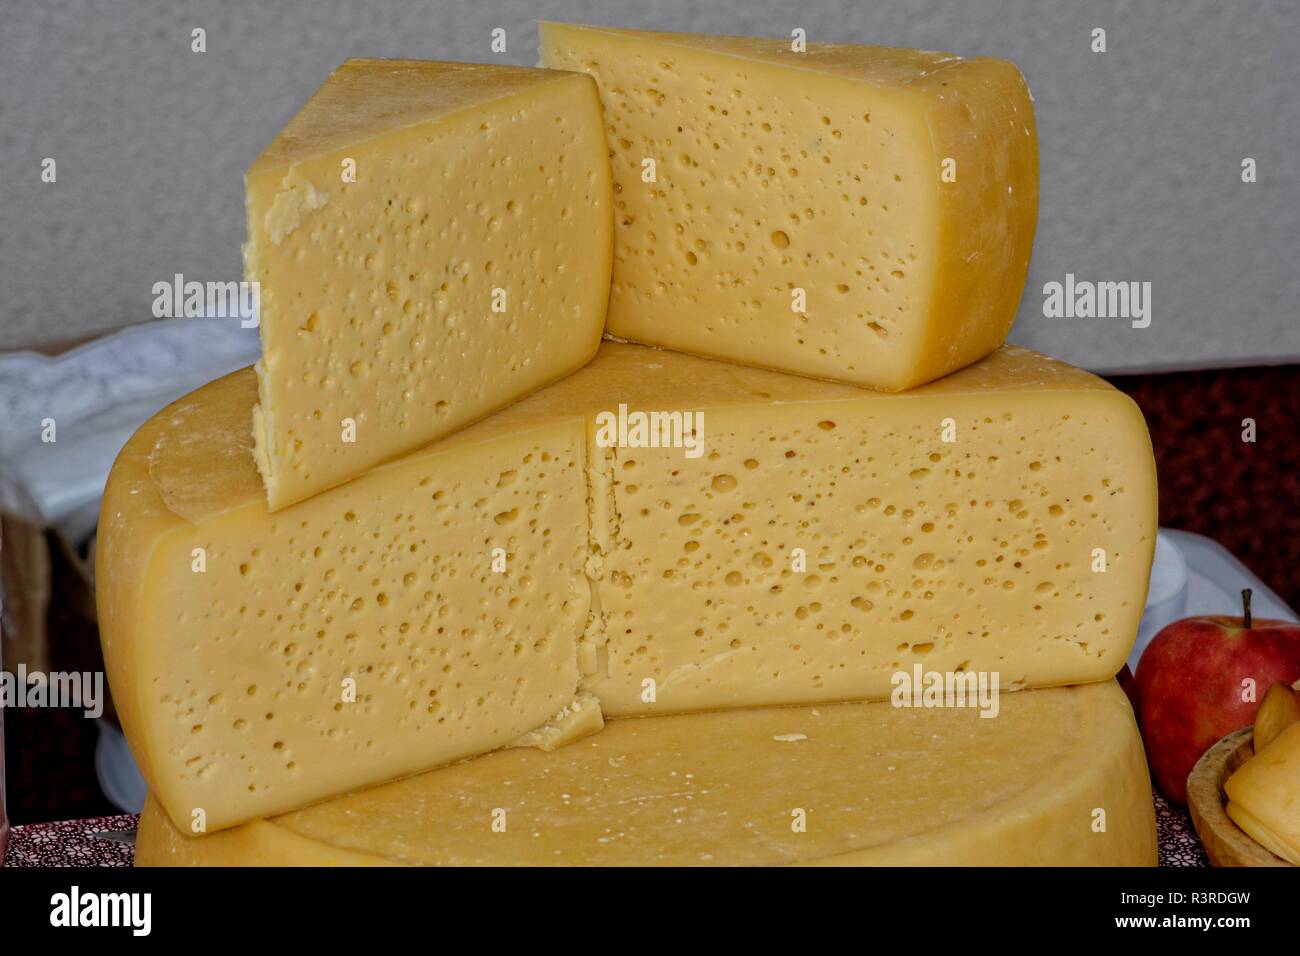 hard cheese pieces Stock Photo